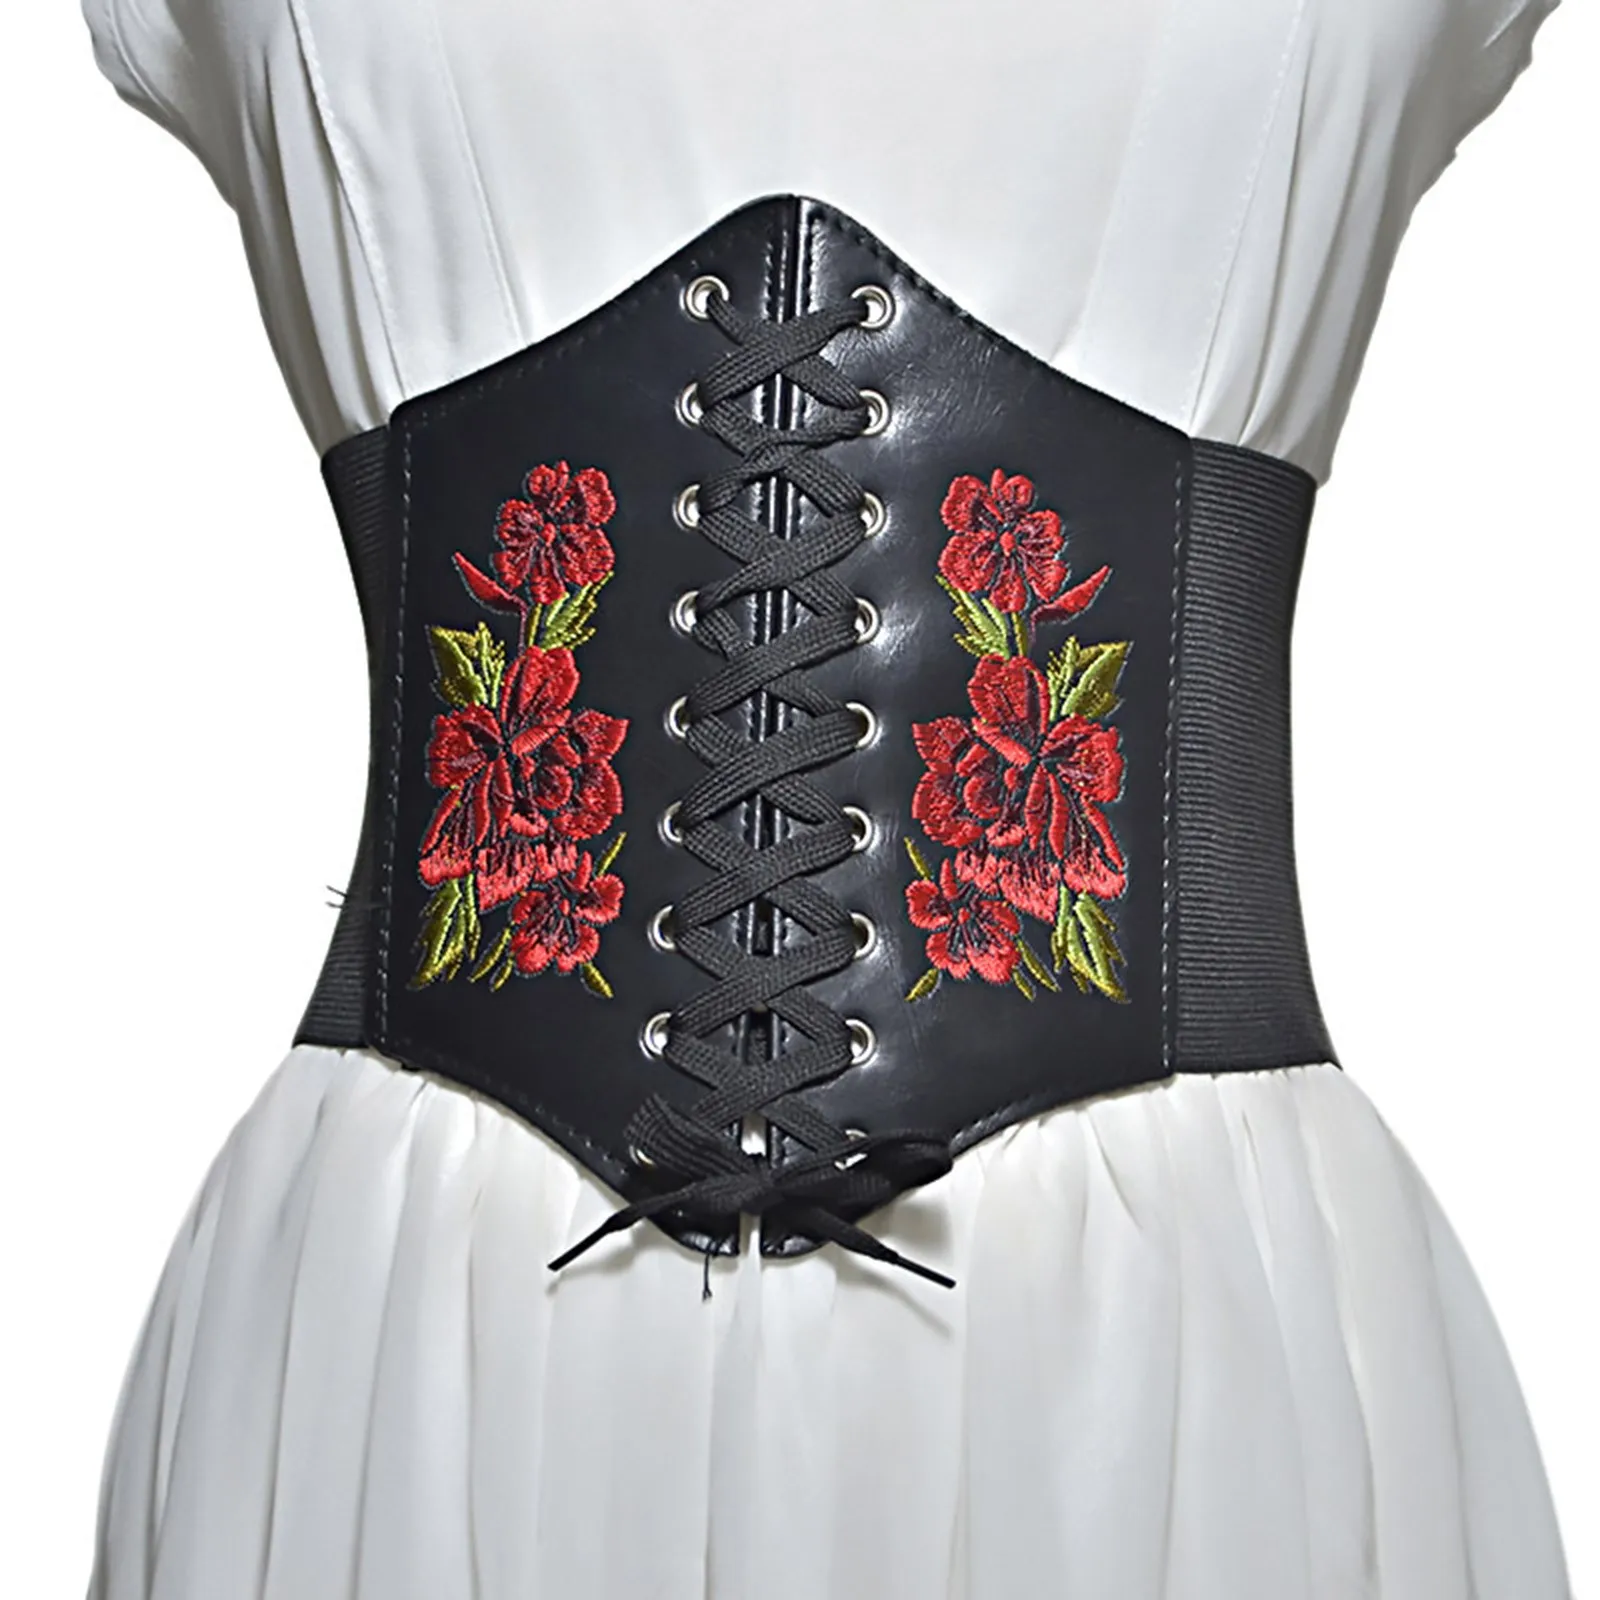 

Embroidery Print Women's Corset Extra-wide Lace-up Elastic Waistband Straps All-match Ladies Girdle Dress Clothing Decoration#25